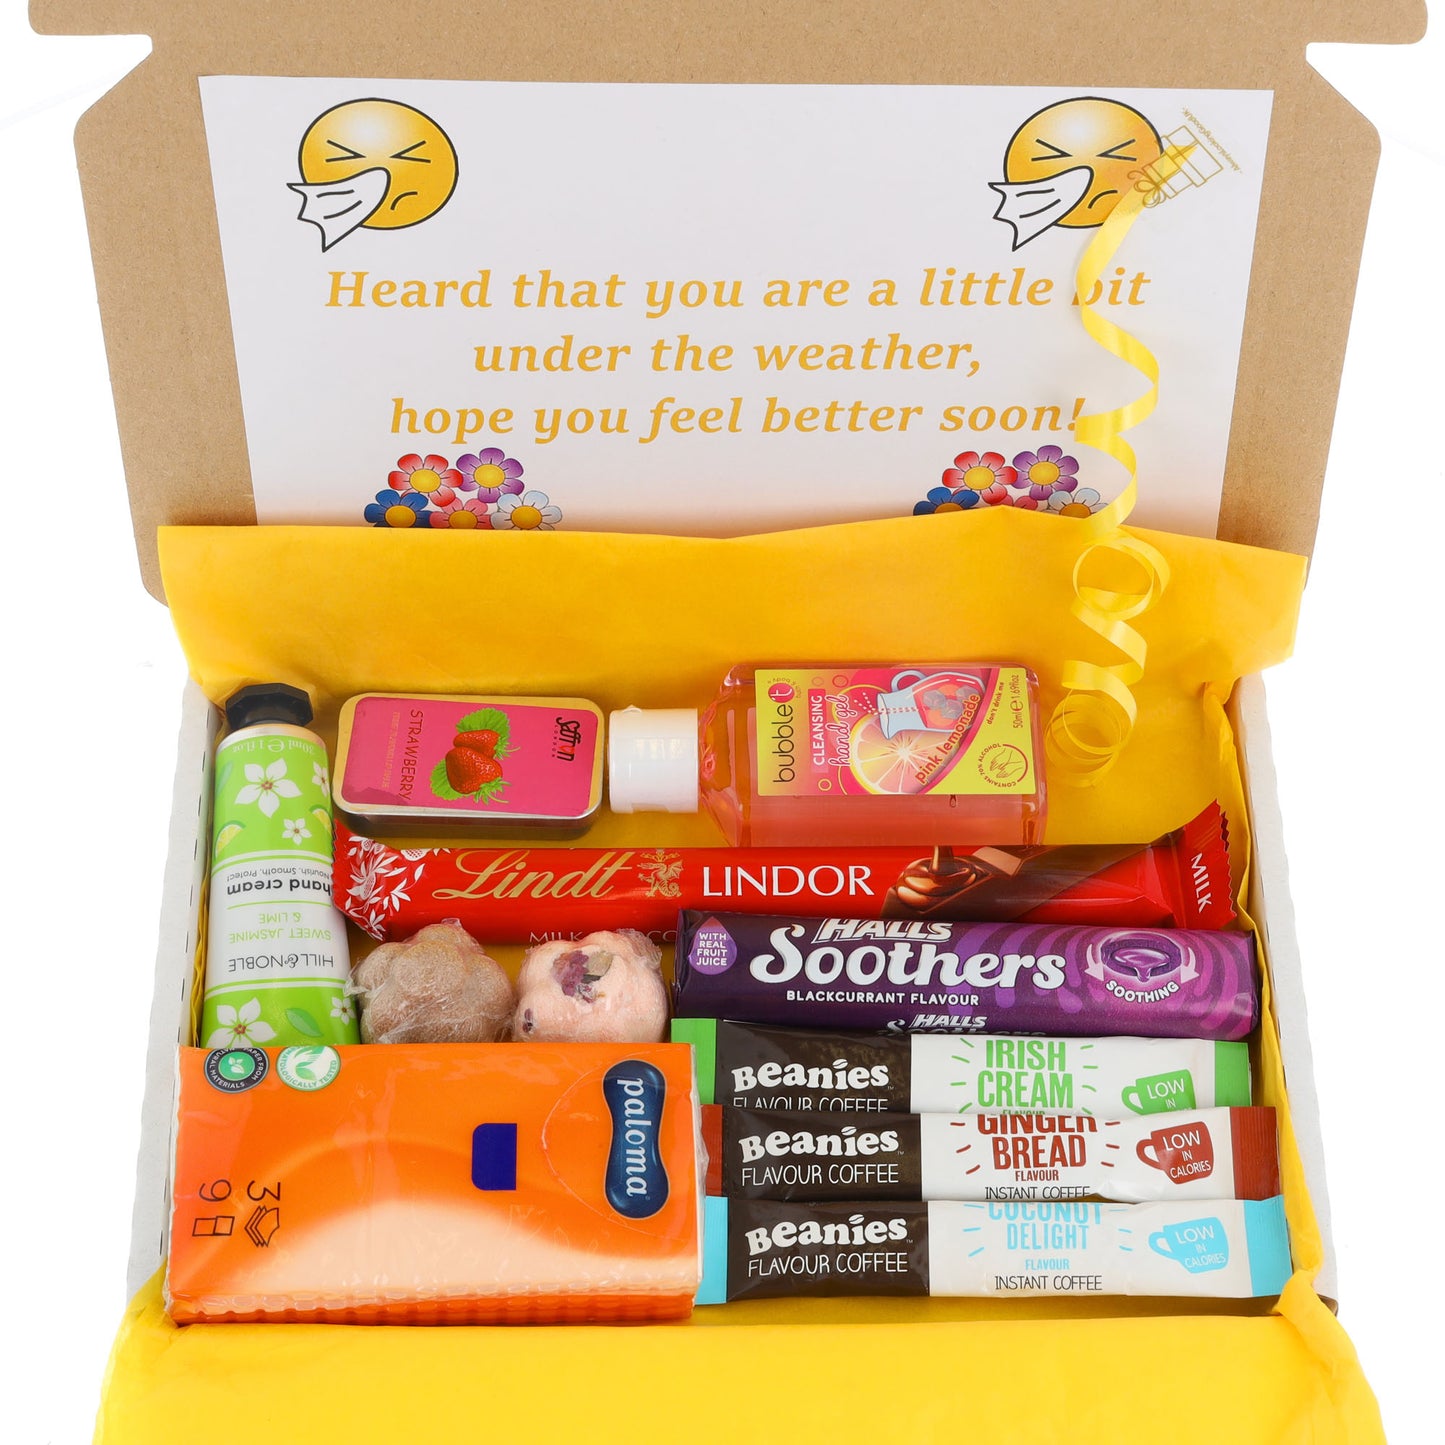 Get Well Soon Care Package Hug in a Box Letterbox Gift Set  - Always Looking Good -   